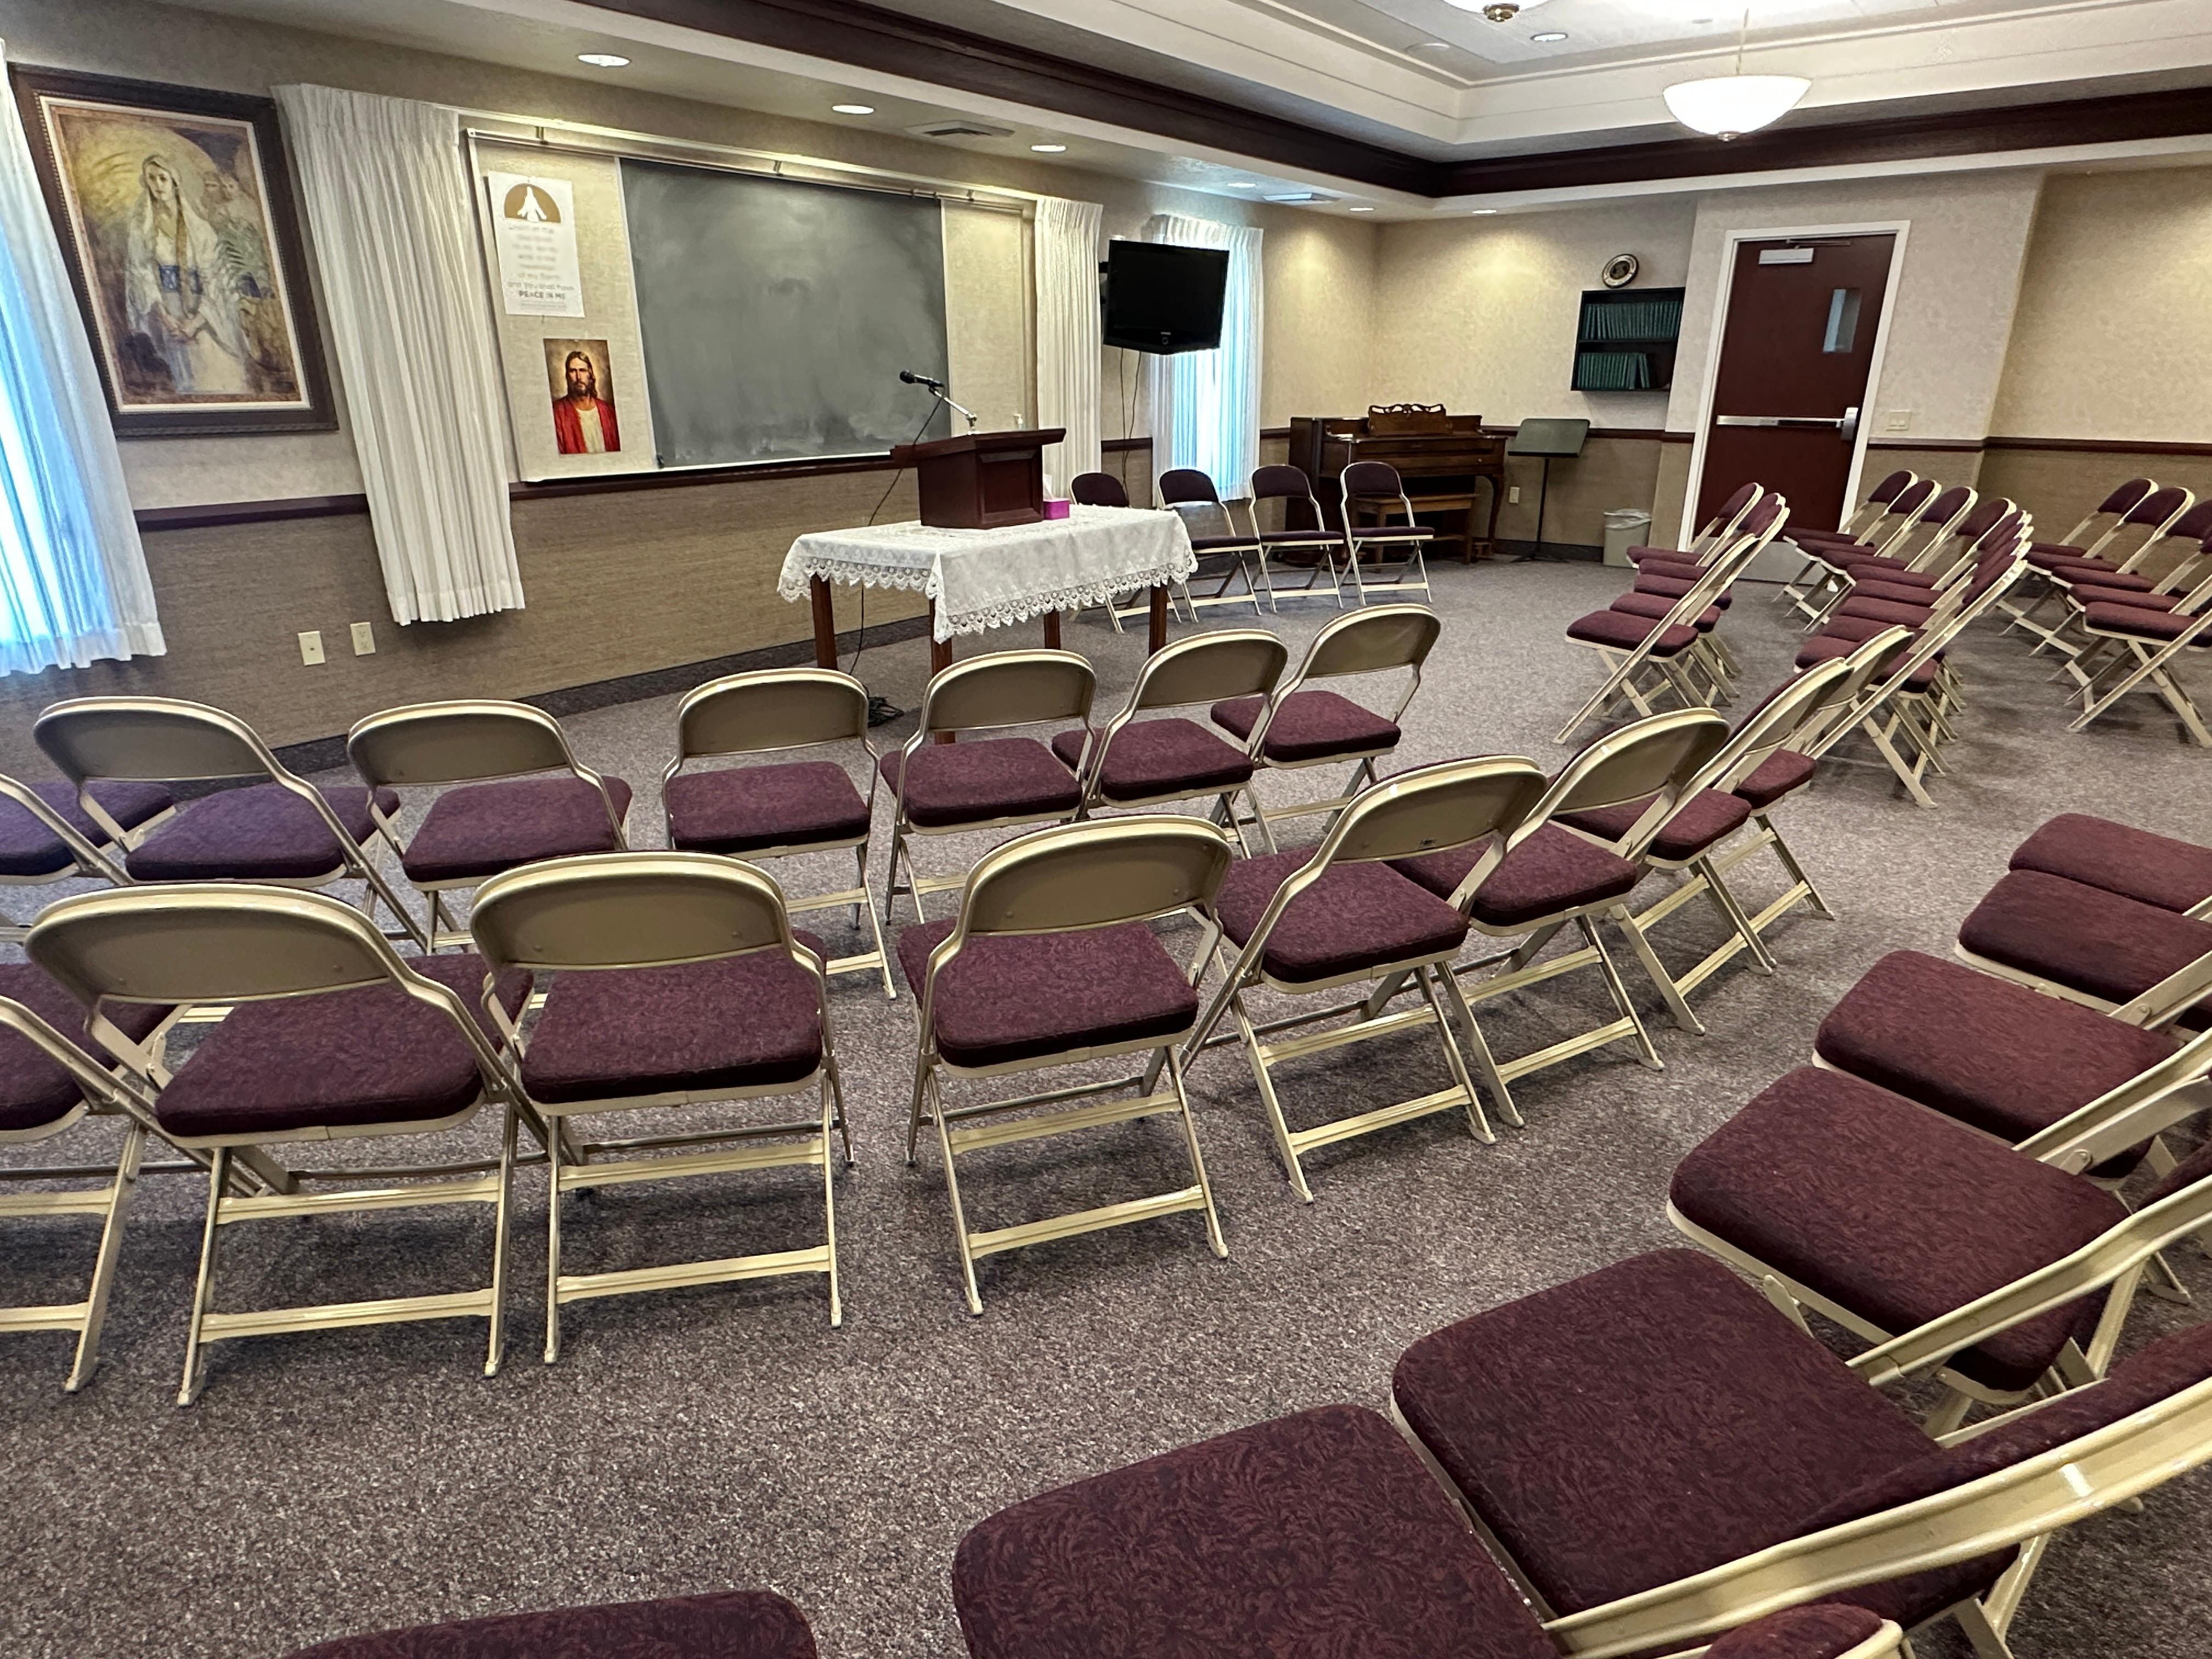 The Relief Society Room. The women's organization meets here every second and fourth Sunday to teach about and testify of Jesus Christ and His gospel.